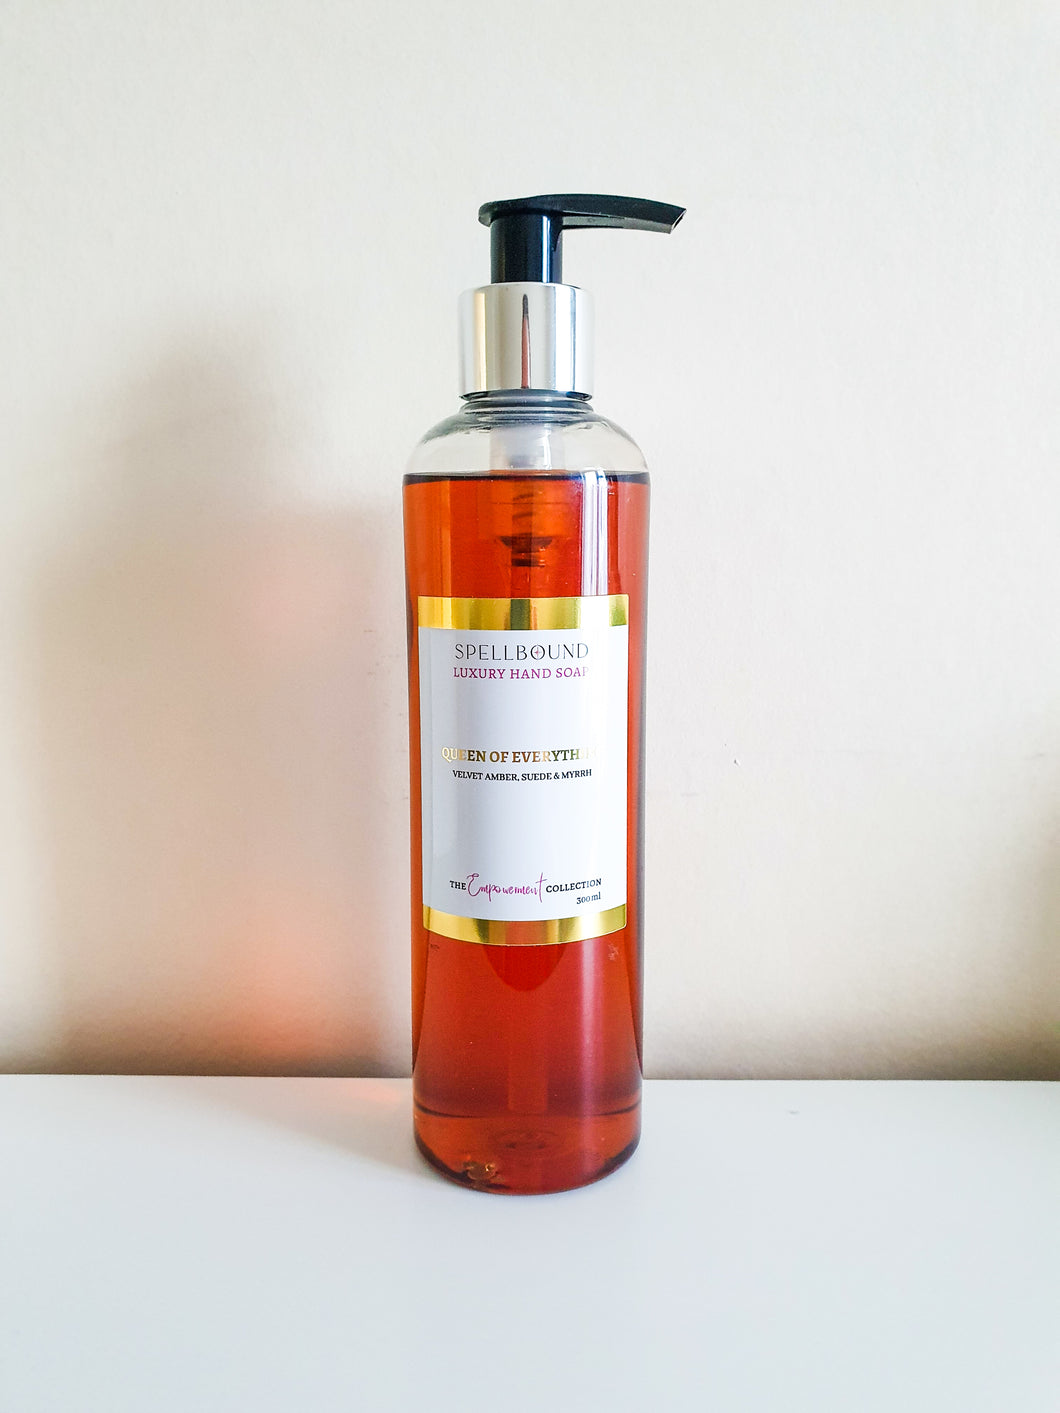 'Queen of Everything' Luxury Hand Soap